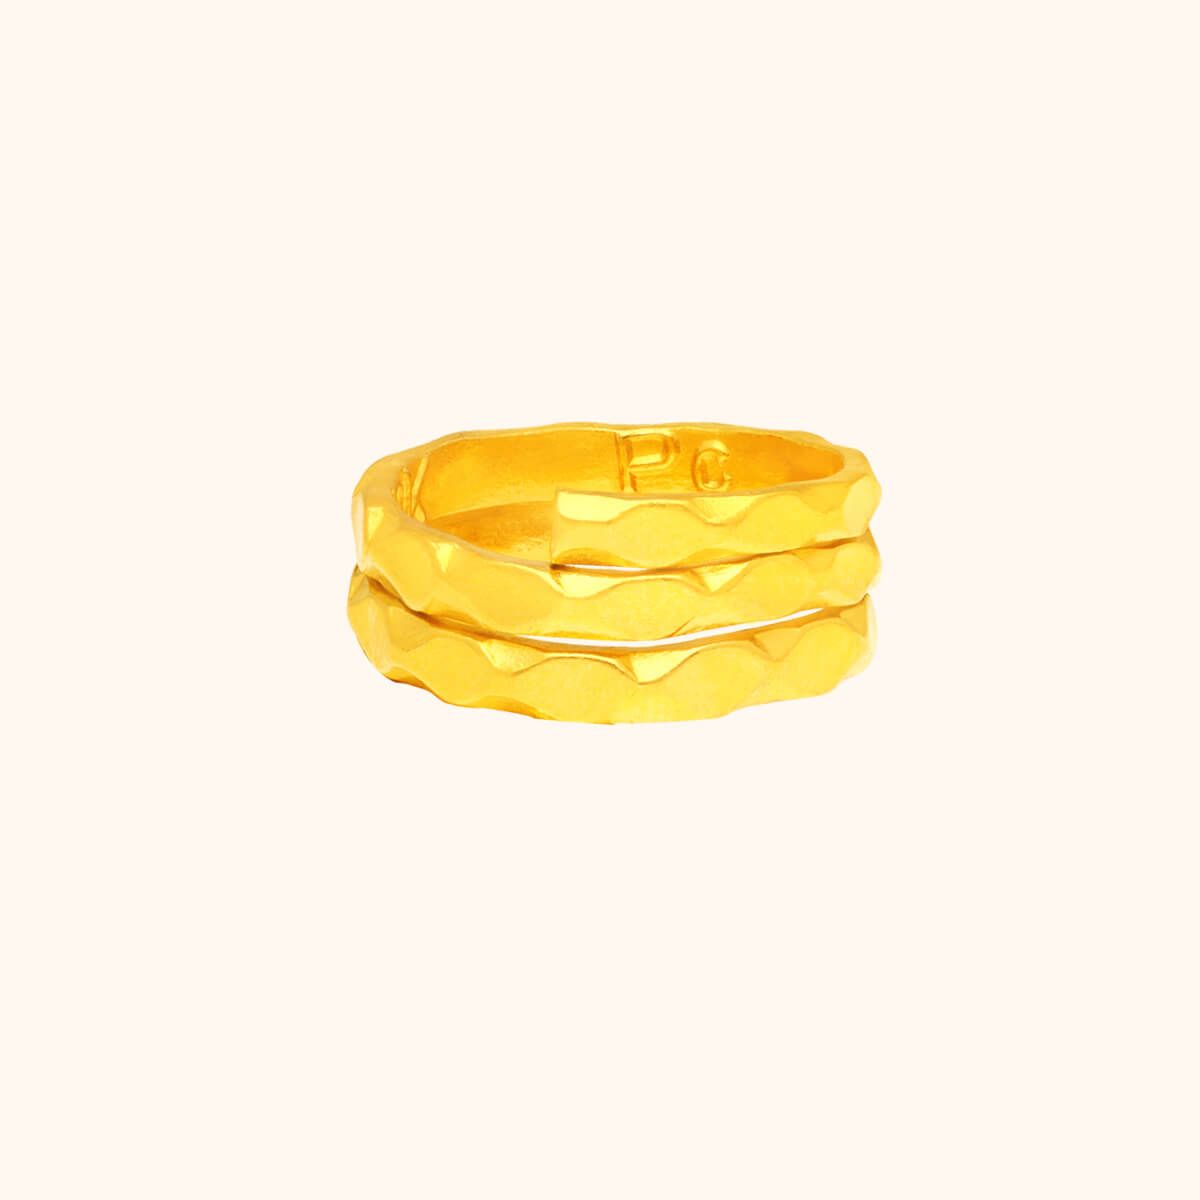 145 (Single Bangle) £265 (Pair) Not real gold hence the low price the... |  TikTok